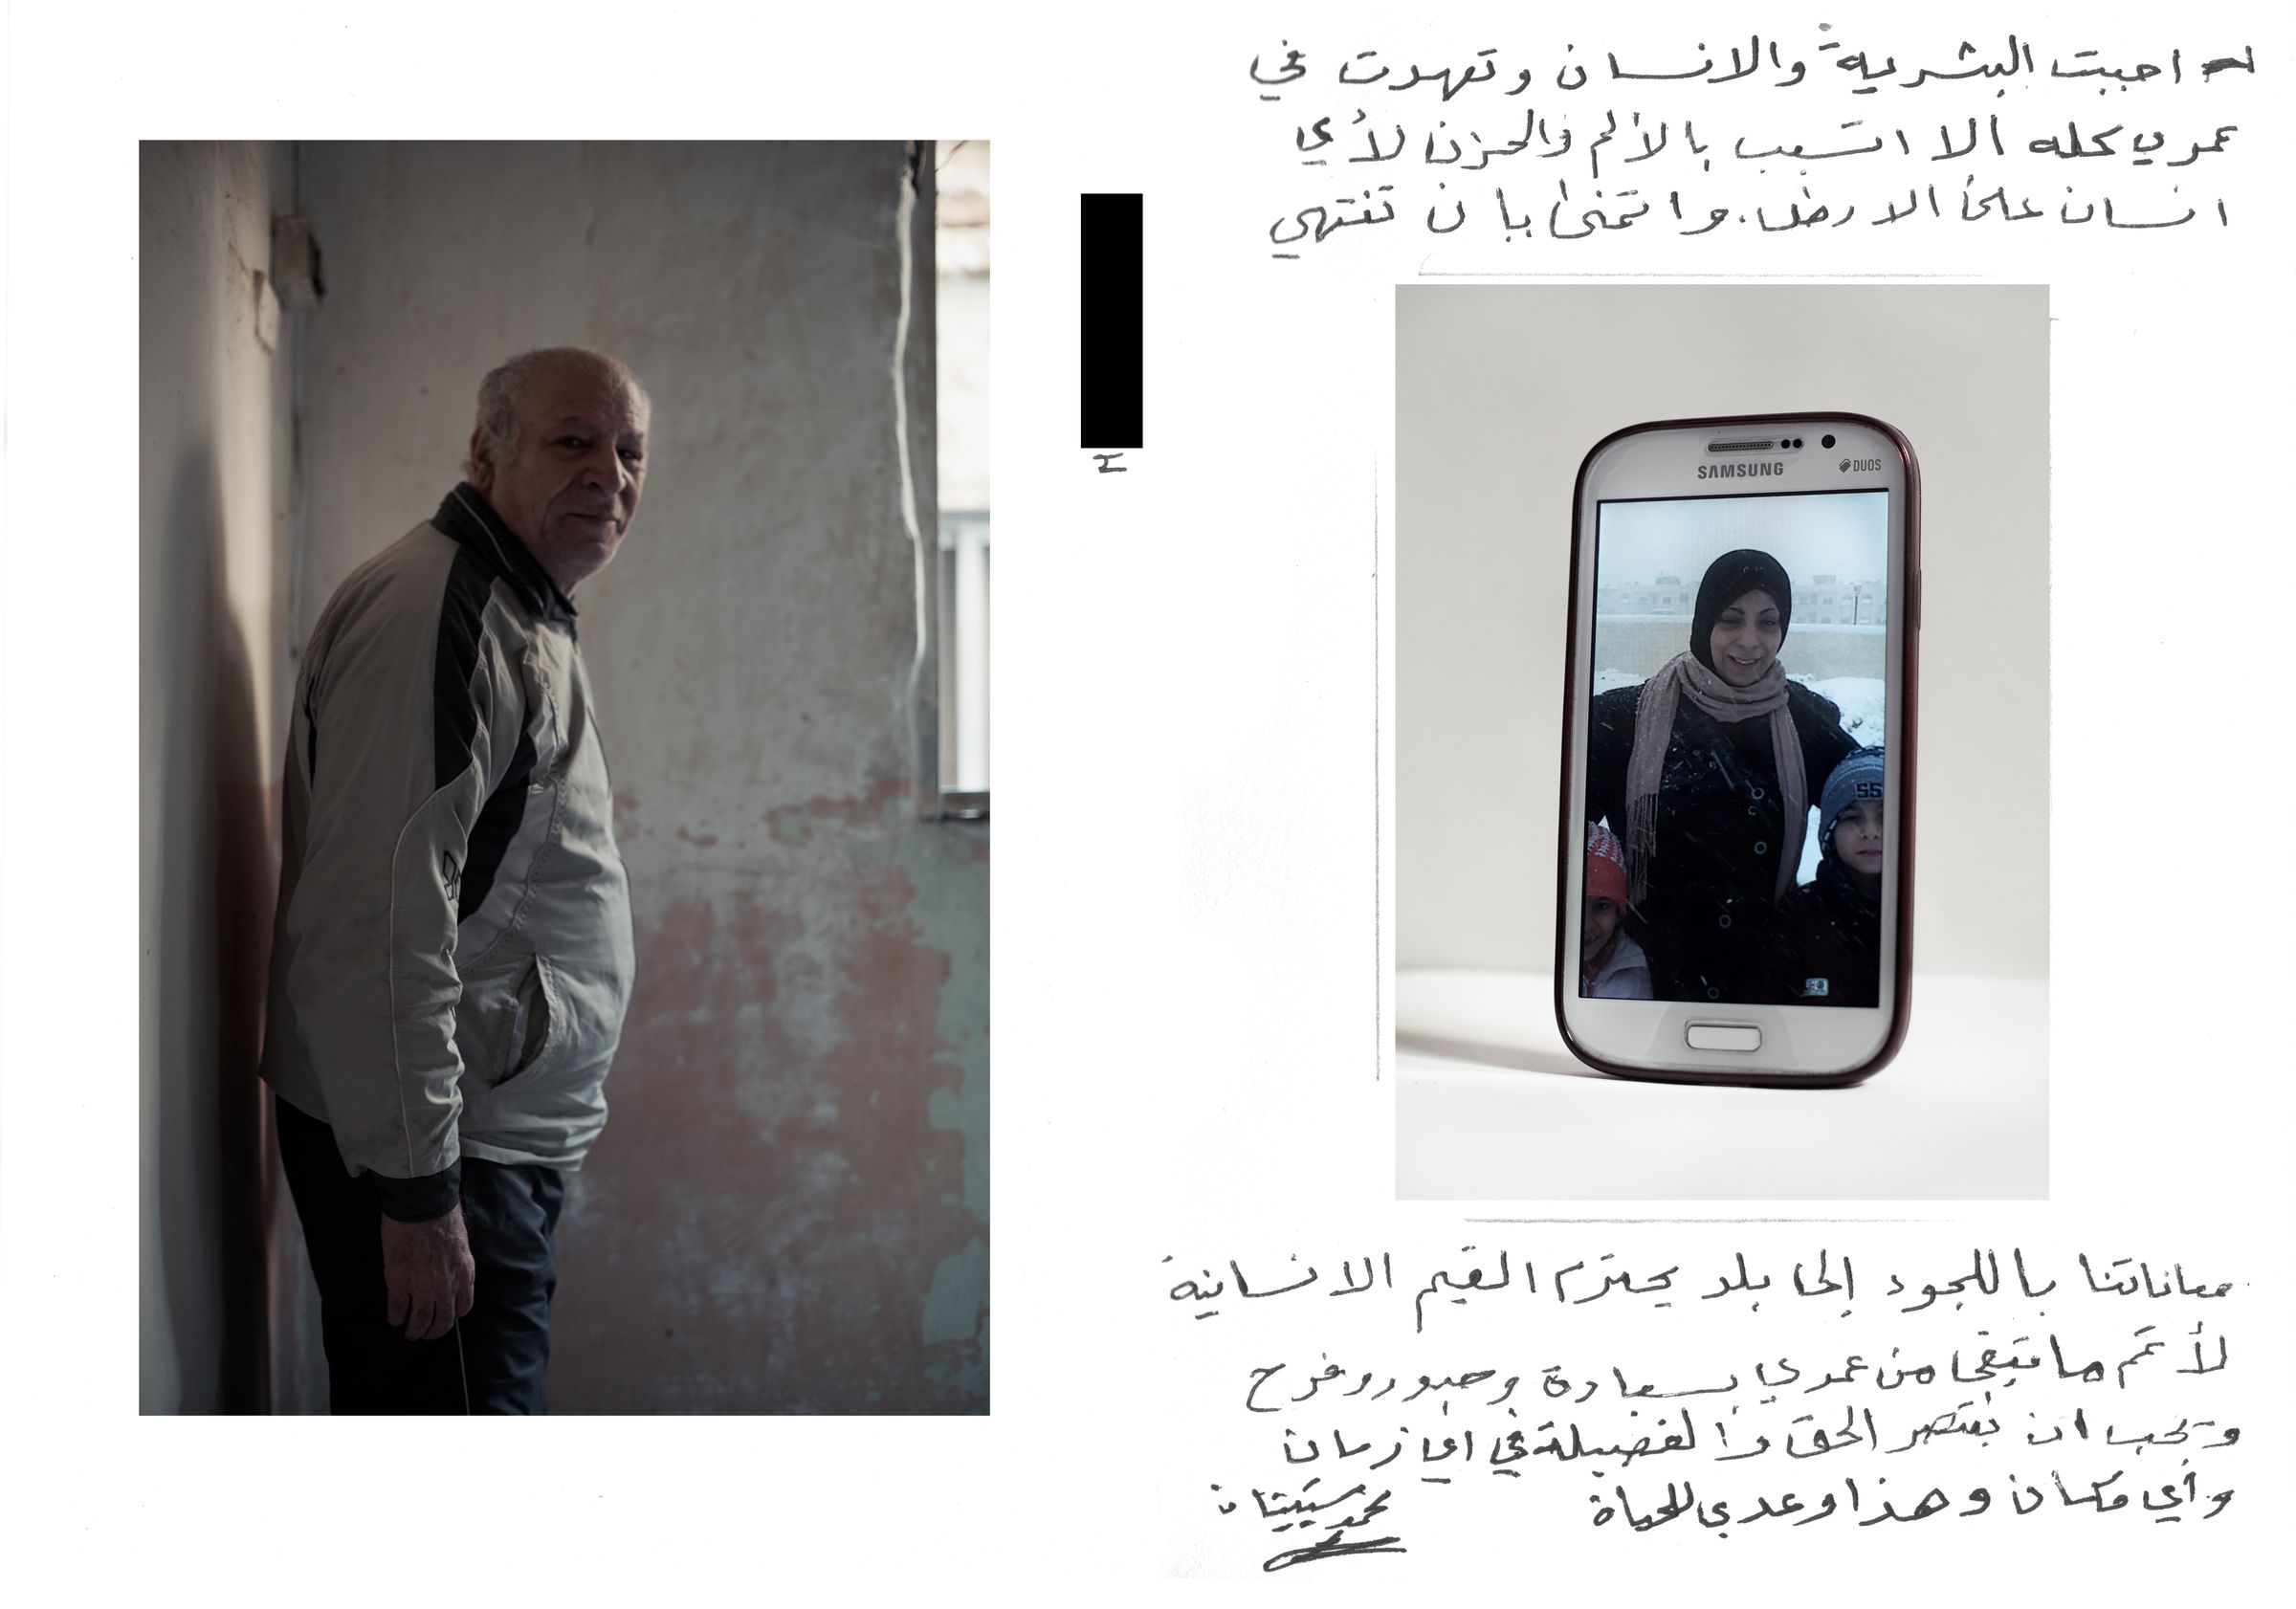 “I loved humanity and humans. I promised that, in my life, I’d never cause anyone pain or sadness. And I wish that our suffering could end by returning to a country that respects human values, so I can spend the rest of my life in happiness, cheerfulness and pleasure.” | Shatilla, Beirut. A photograph of his daughter and grandkids, taken on their arrival in Denmark by her husband. At one time in his life, Hamad taught history and geography. They were living in Yarmouk before they fled in 2013.